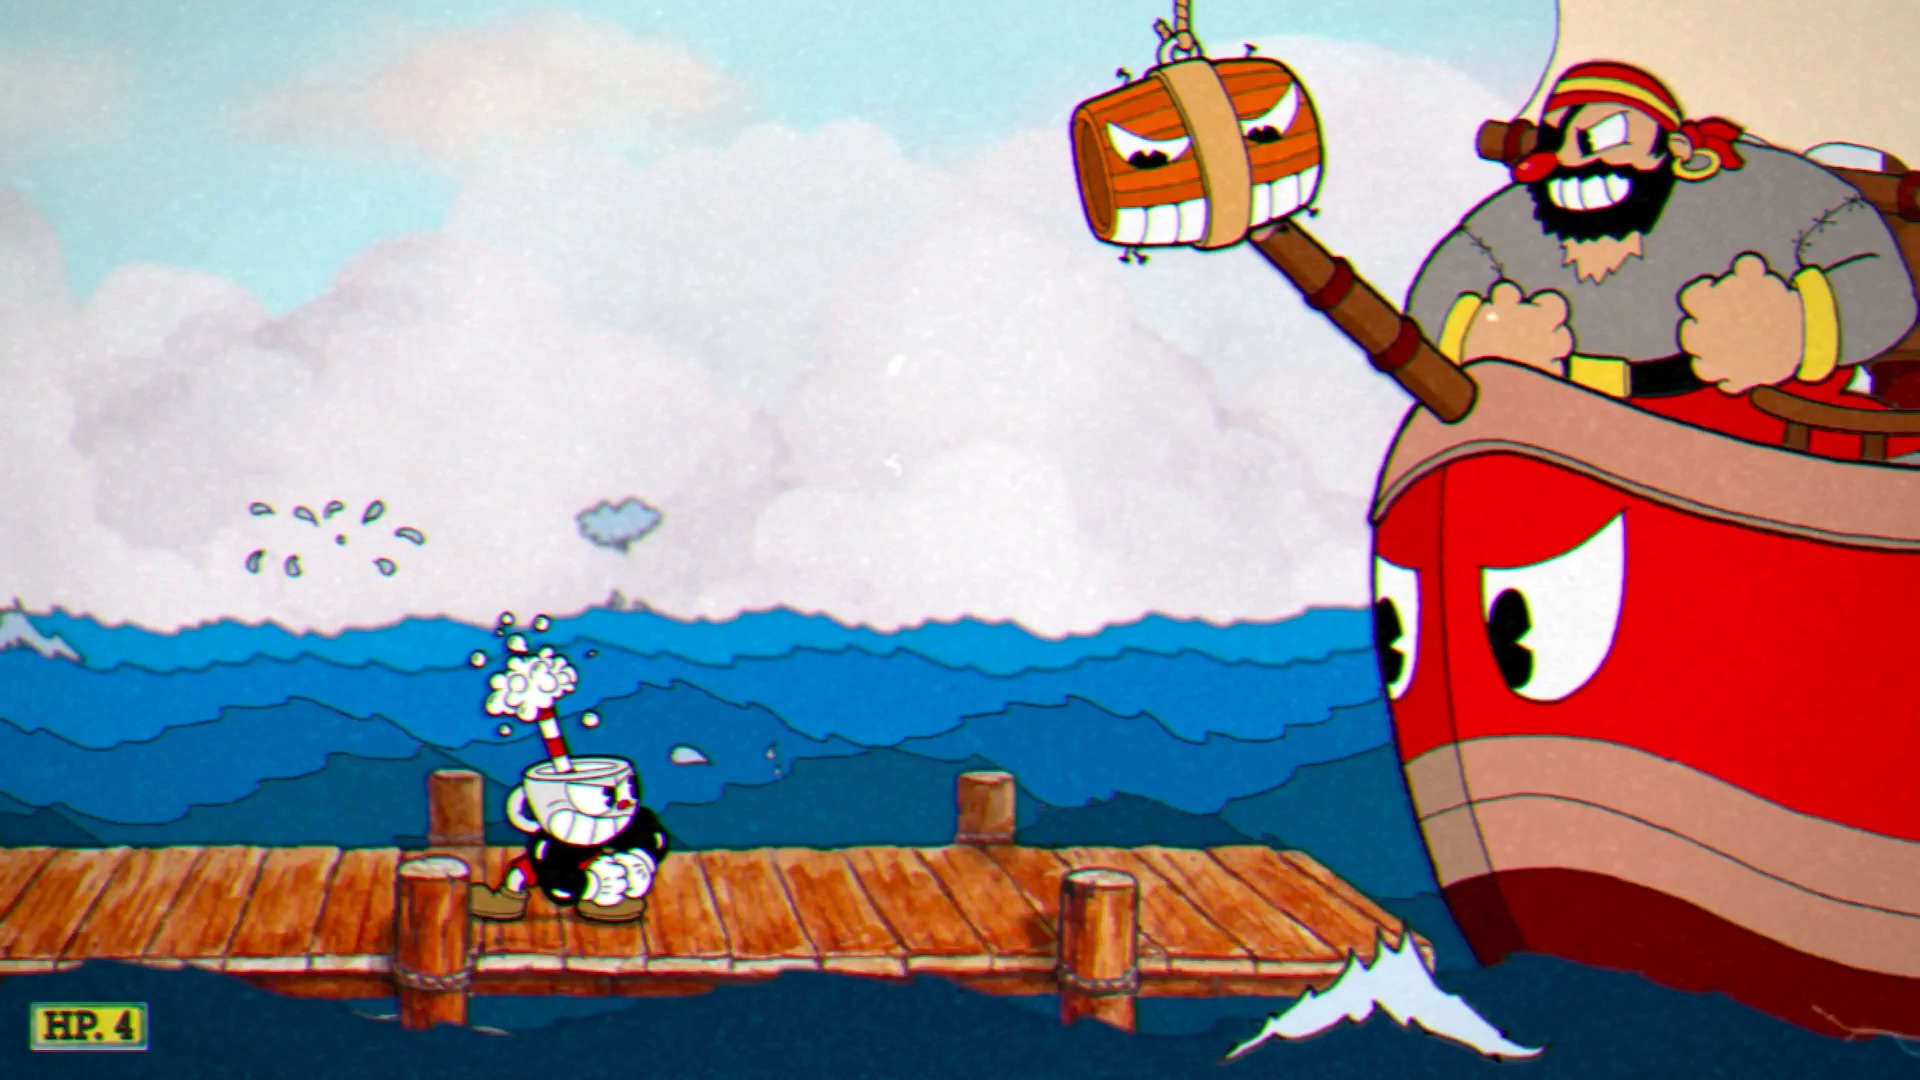 Cuphead Remains One of the Most Lovable Games of All Time